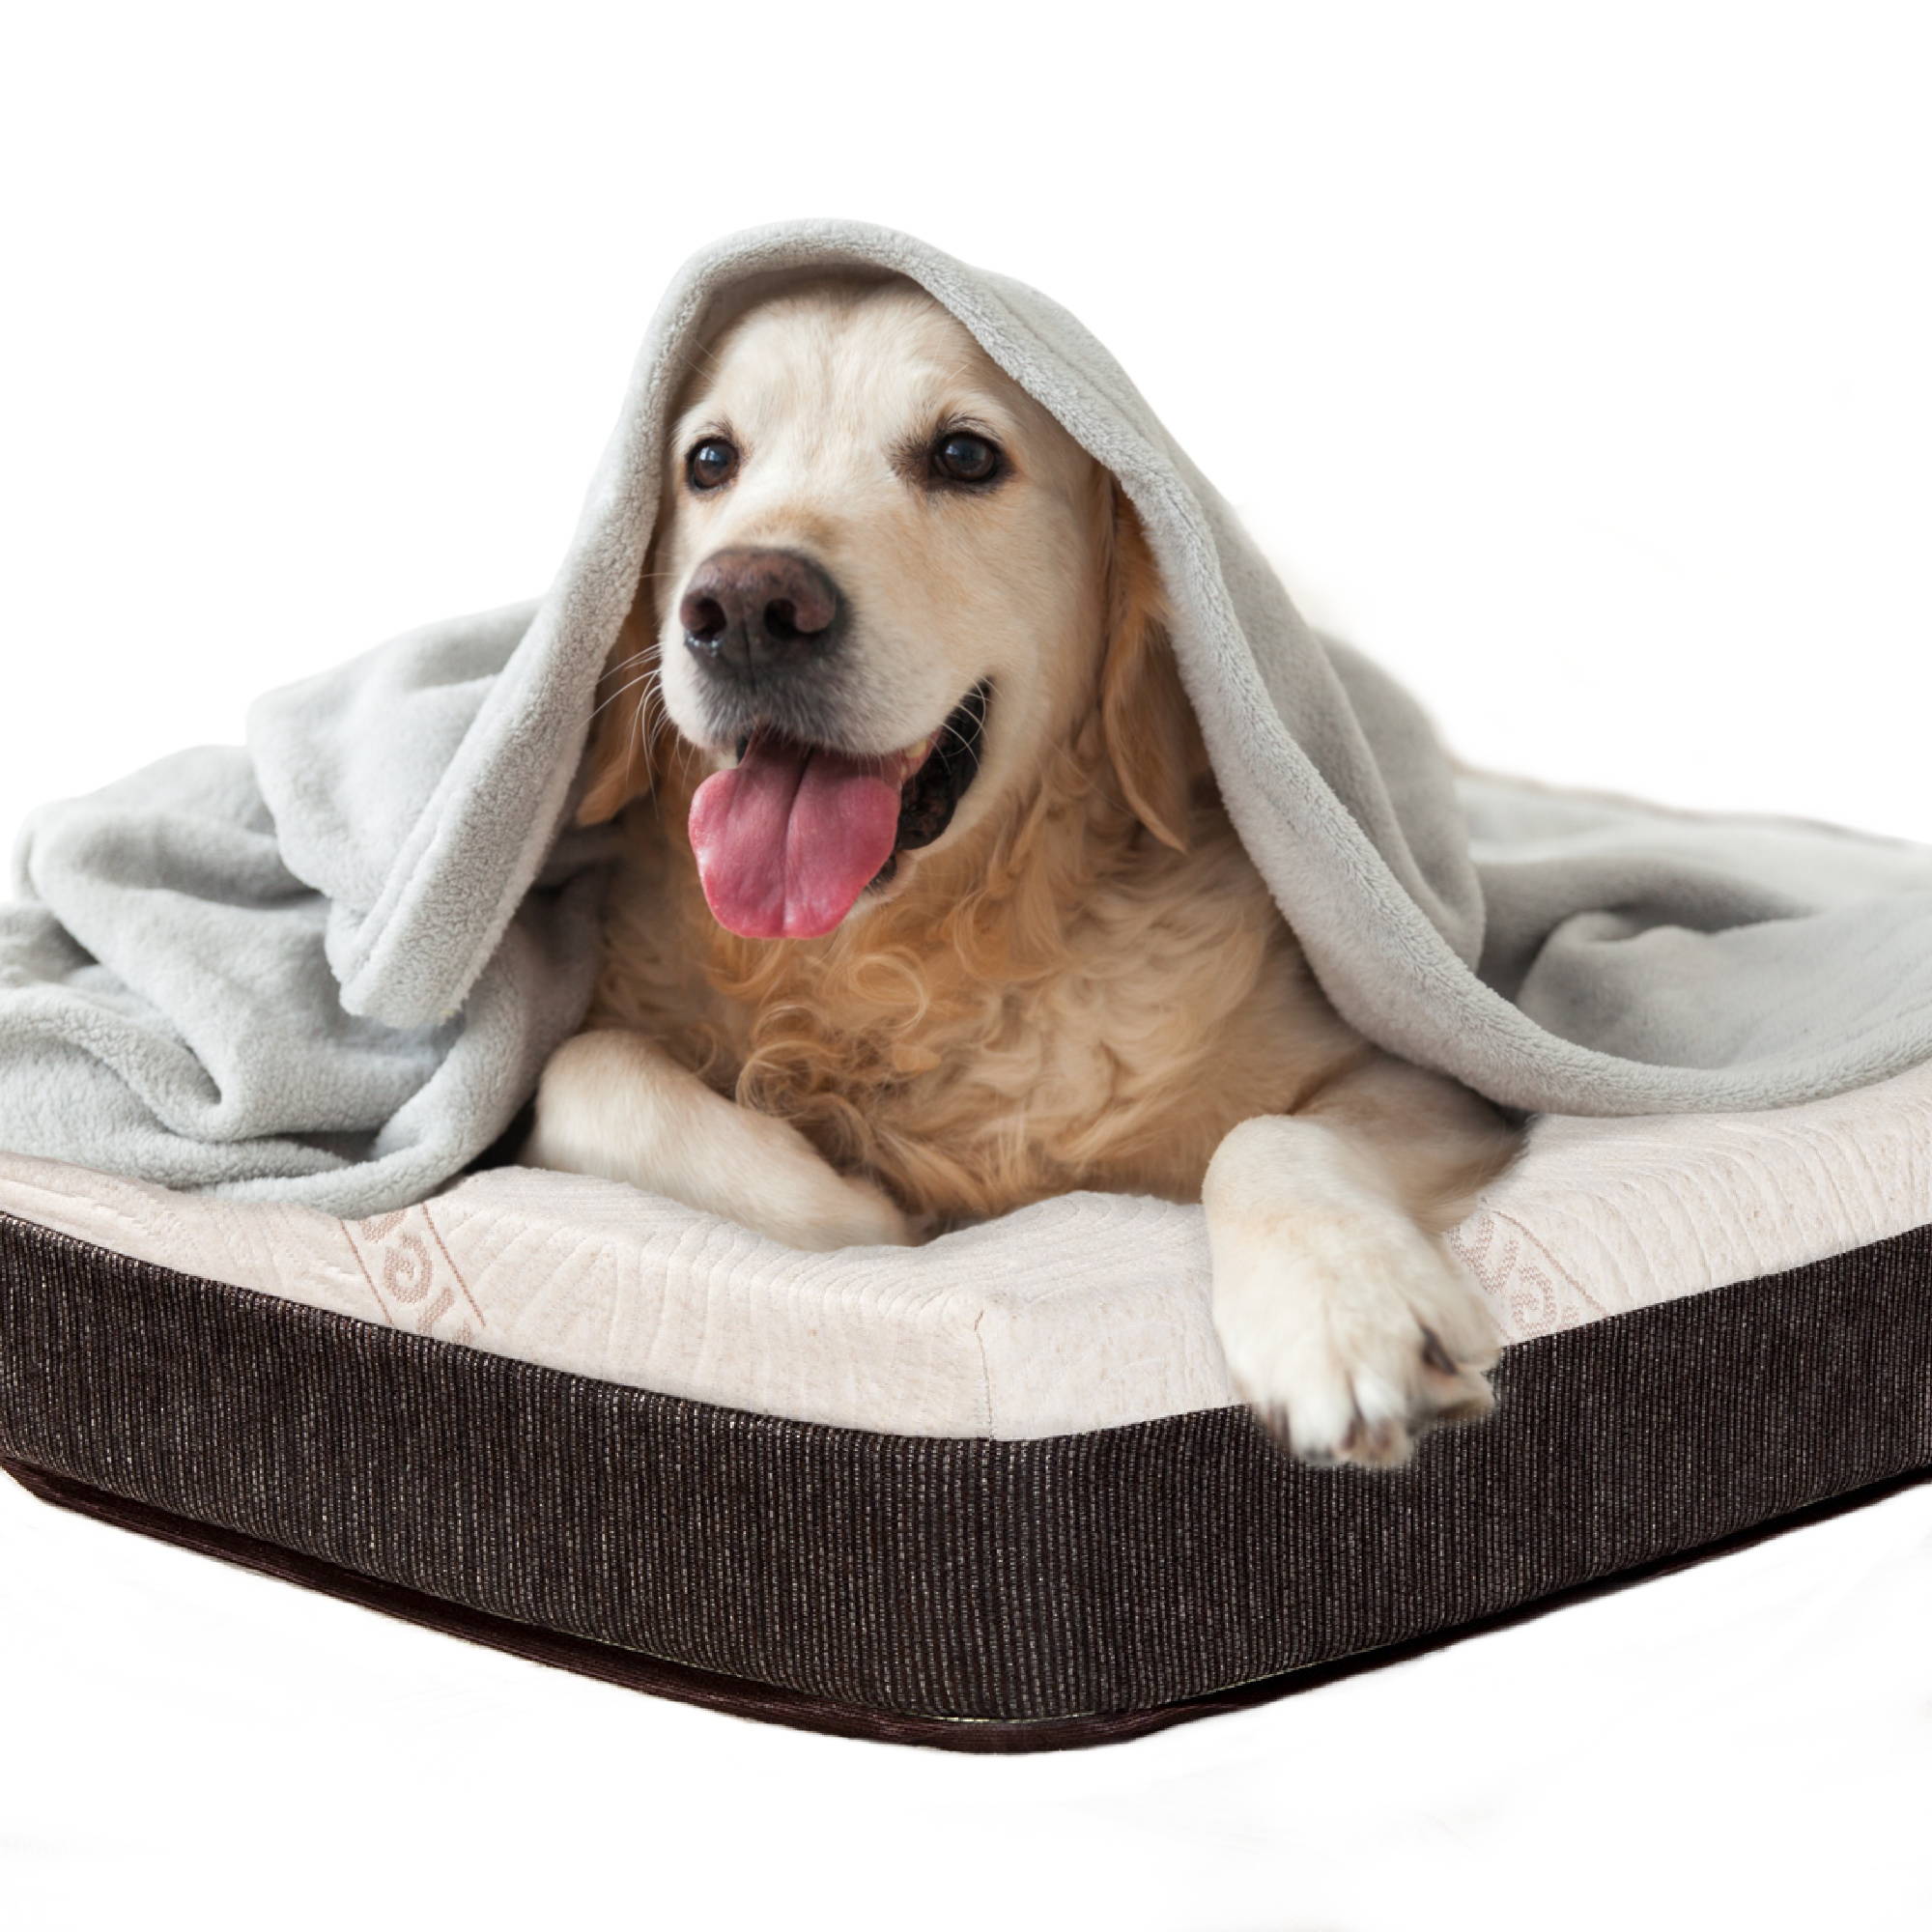 Happy Golden Retriever under a blanket on a CBD and copper infused pet bed.